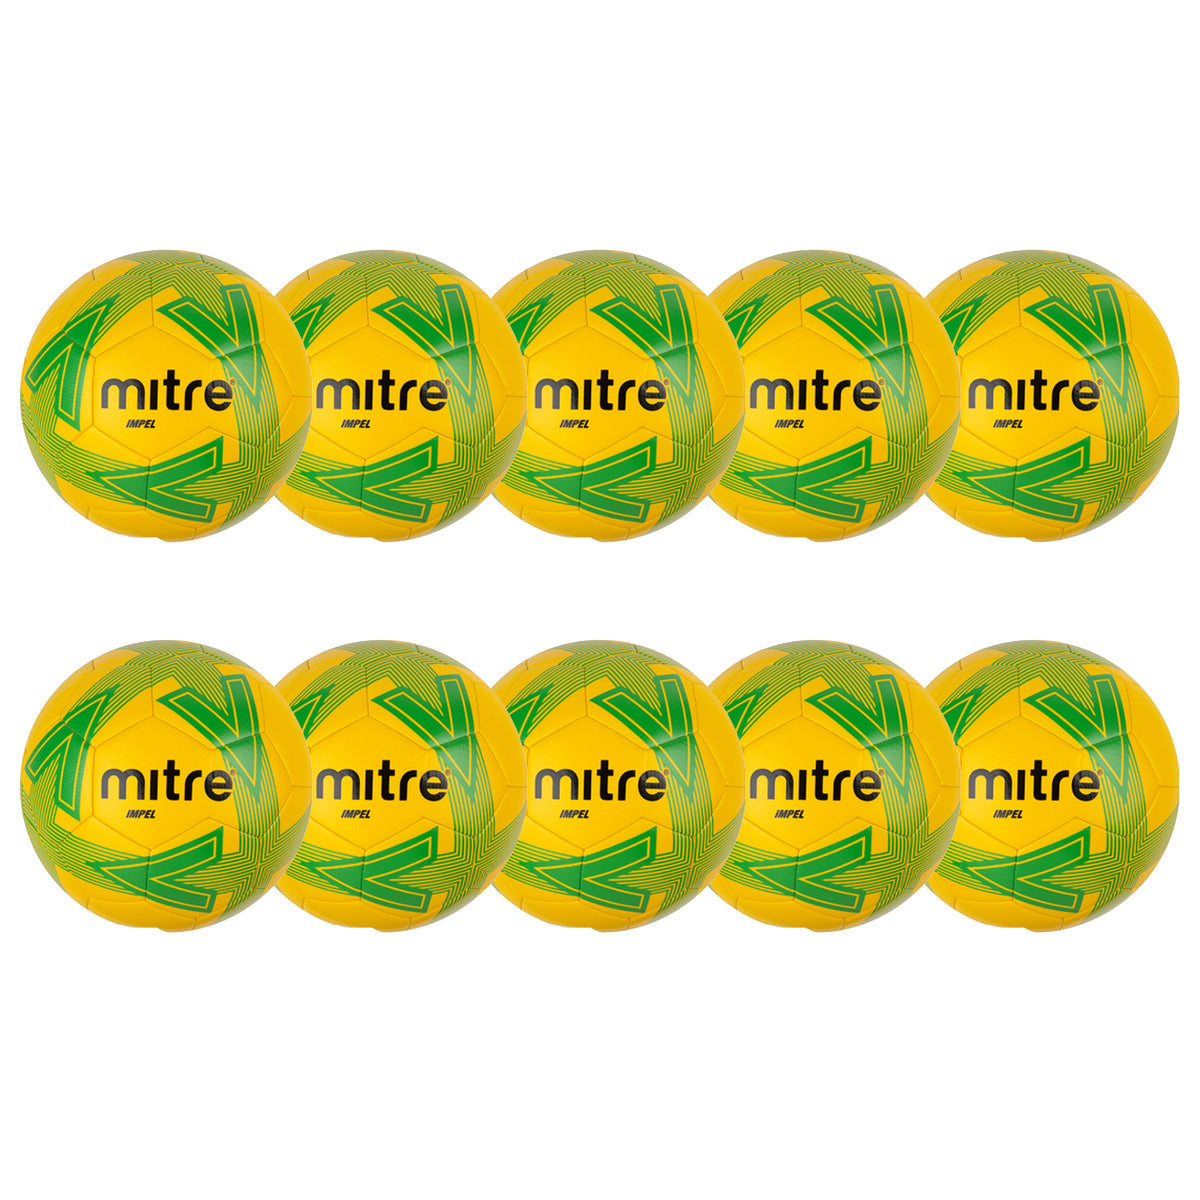 Mitre Impel Football (Pack of 10): Yellow Green